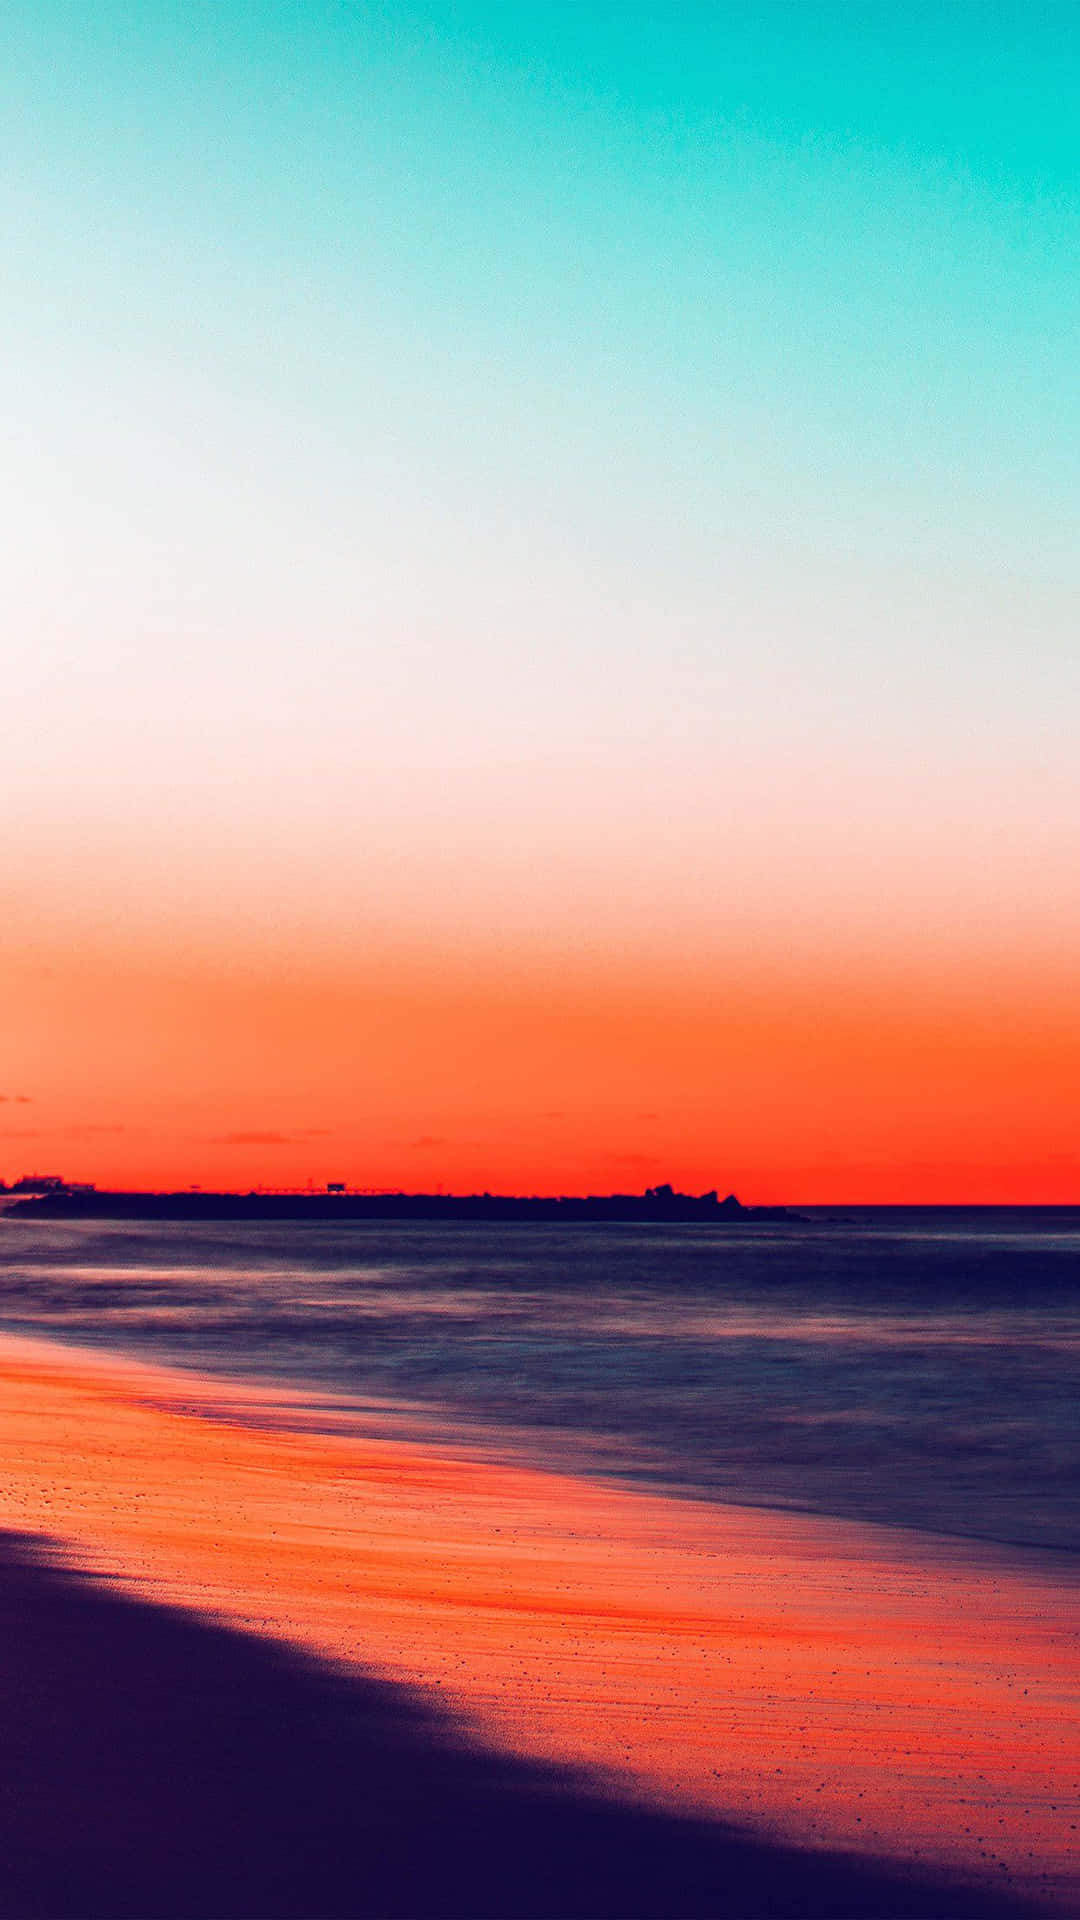 Download Watch The Sunset Over A Secluded Beach With An Iphone Wallpaper